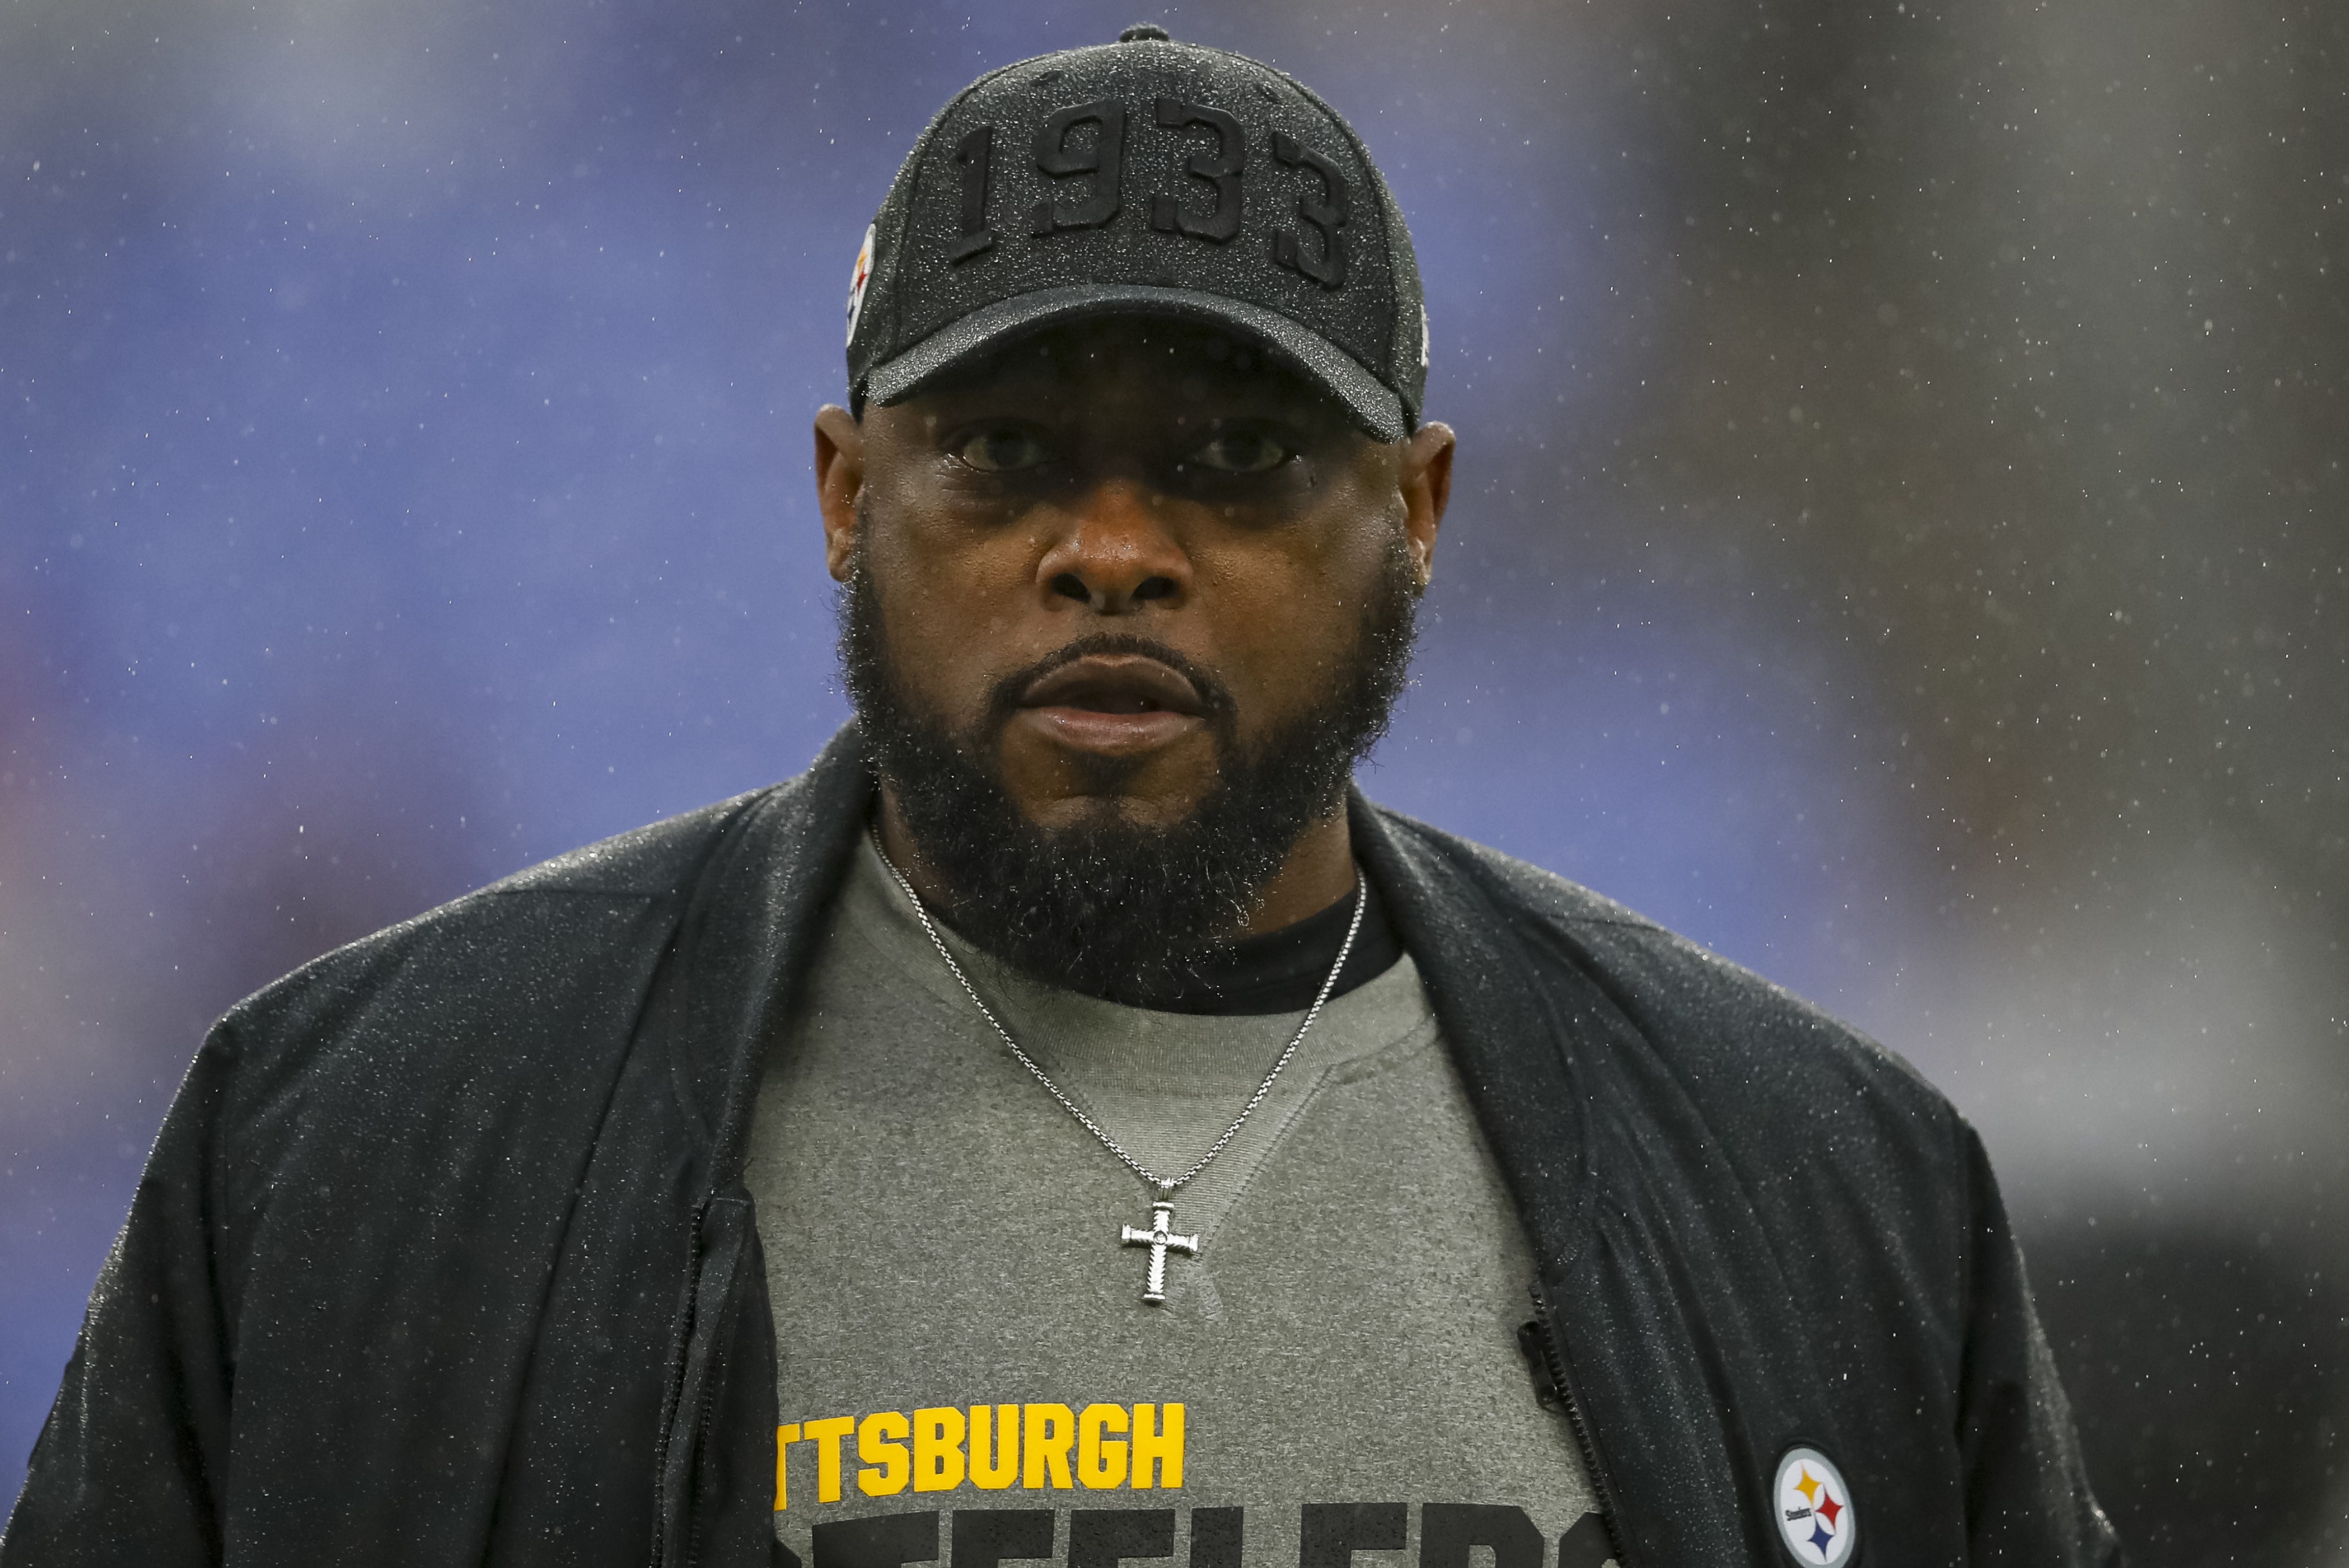 NFL coach Mike Tomlin of the Pittsburgh Steelers